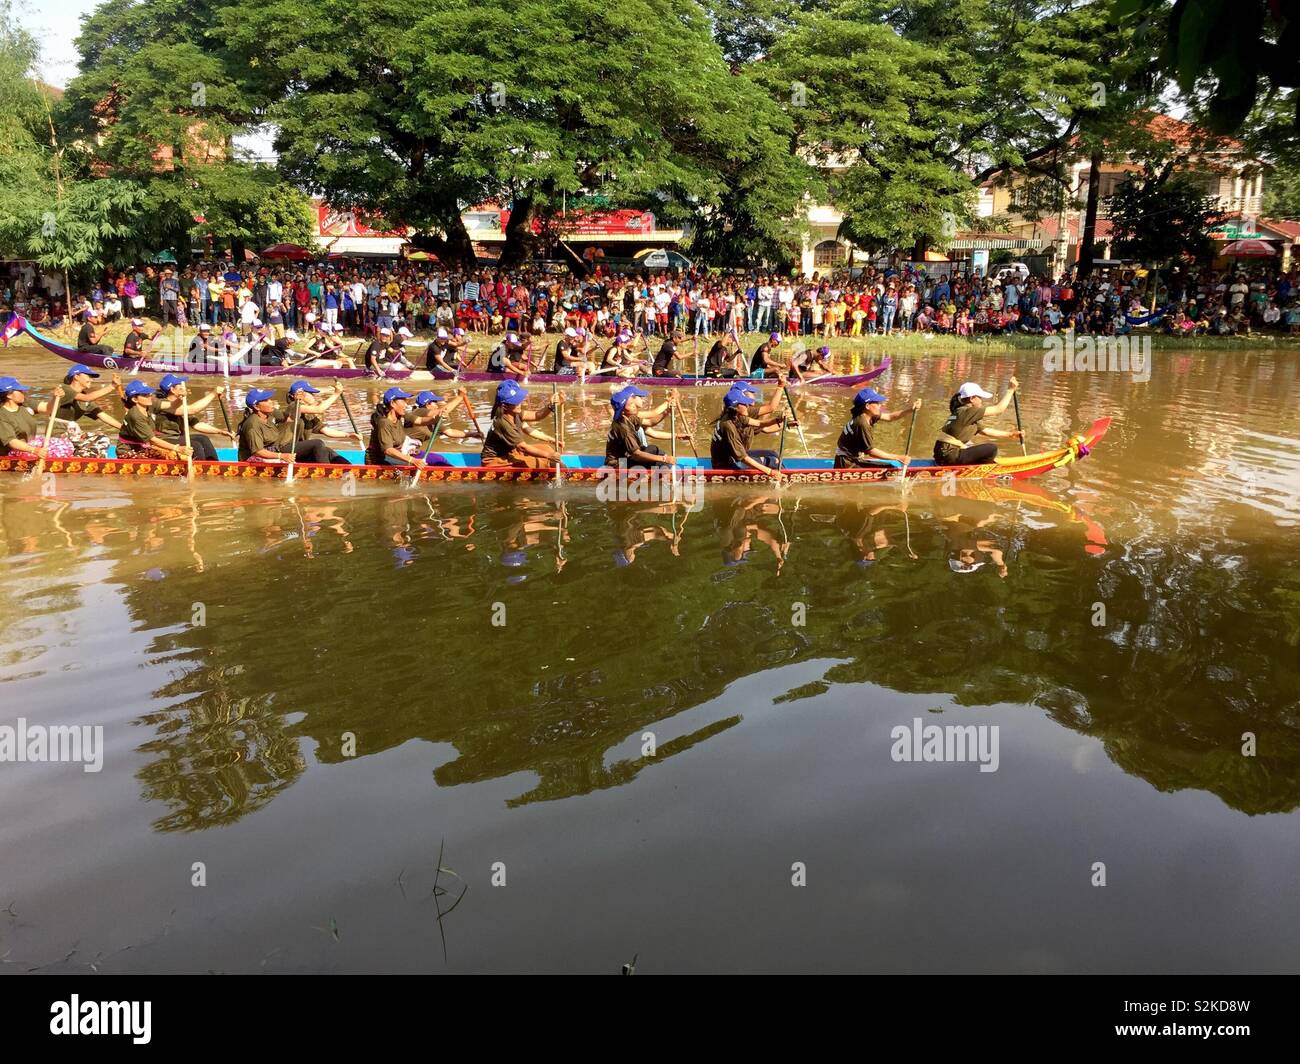 Boats racing during water festival, Siem Reap, cambodia Stock Photo